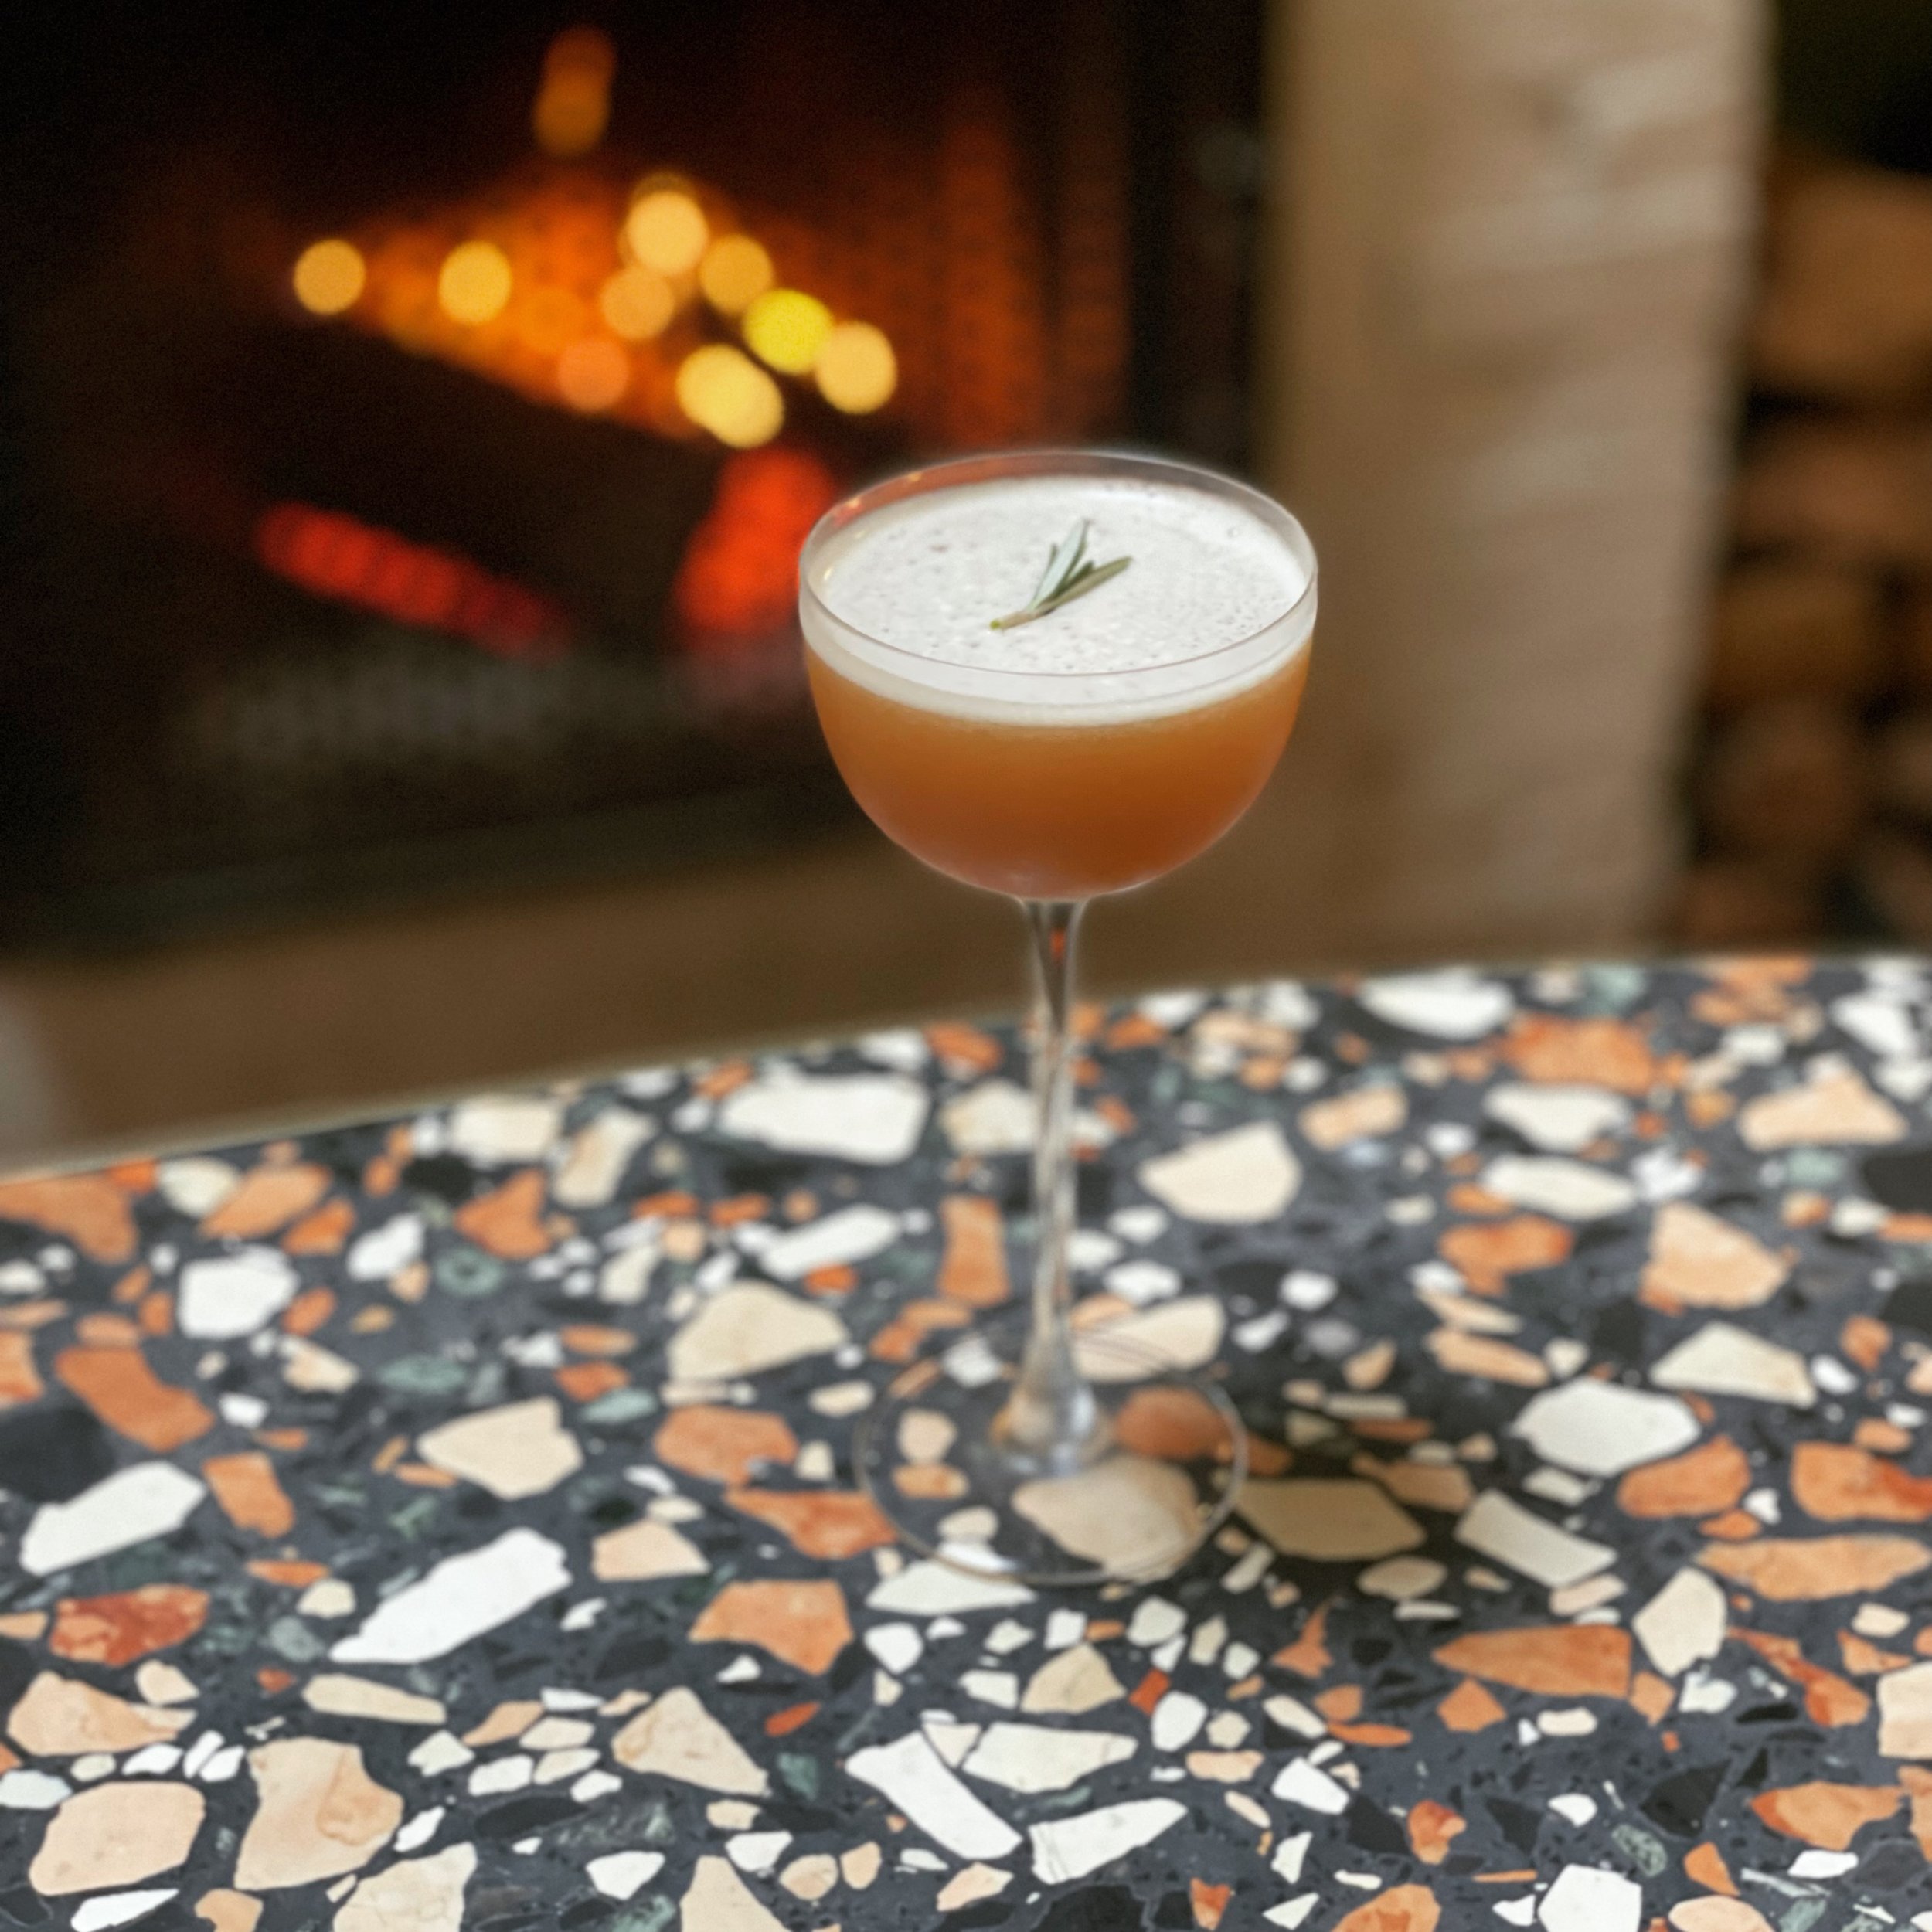 Single malt scotch whisky, groseille, dry vermouth, px sherry, citrus &mdash; a smokey dry winter sipper with a bit of a feel to it&rsquo;s namesake, Jazzanova (our most-played artist at the venue, no doubt) 

Plenty of new winter warming cocktails o